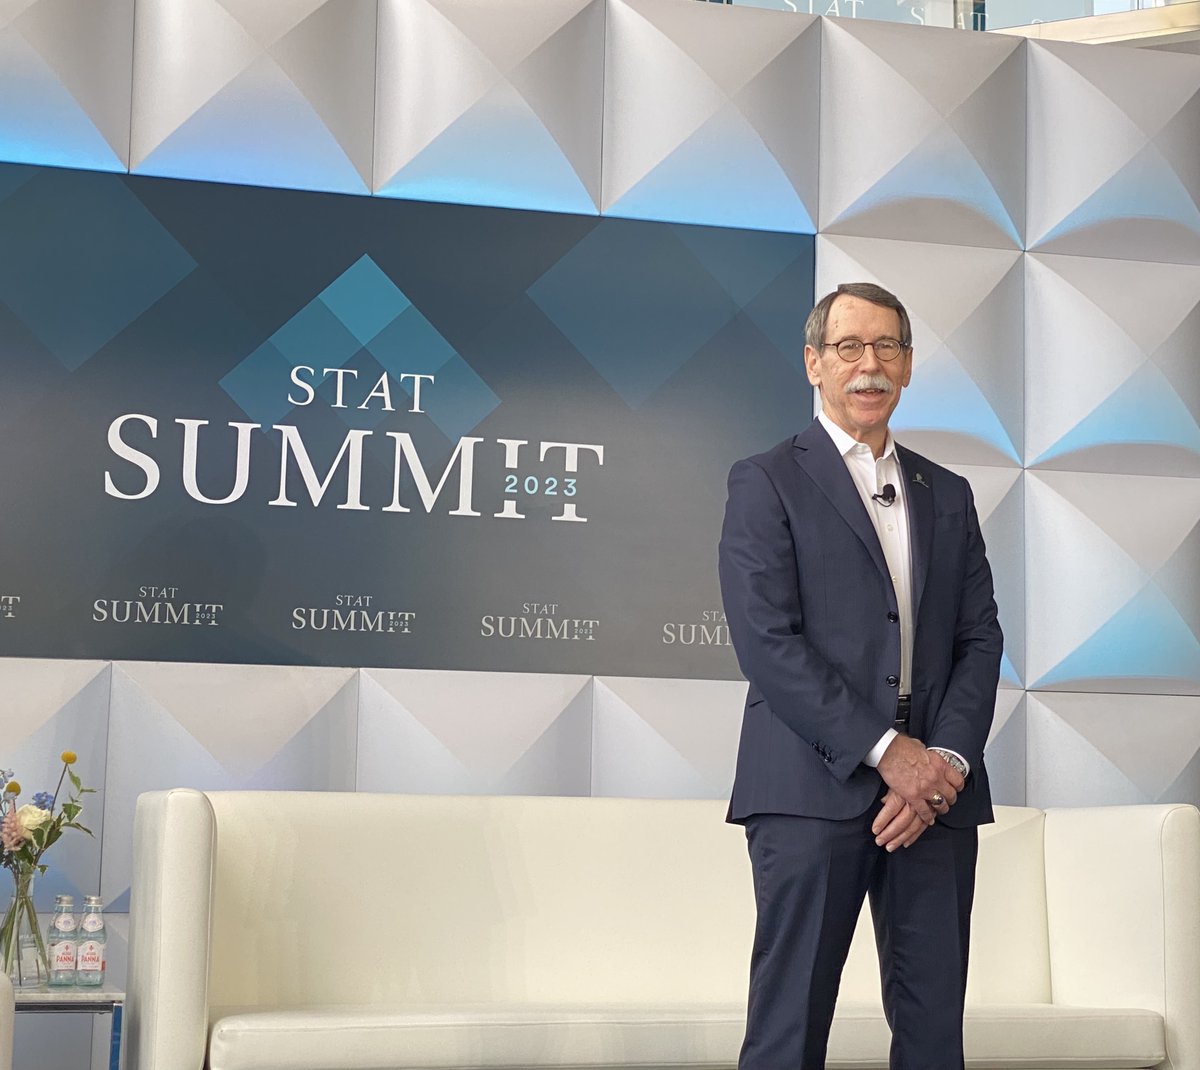 '400K children develop cancer around the globe. 200K are never diagnosed and die,' says SJ CEO Jim Downing. 'We need to work with pharma, biotech, patient advocacy & organizations to accelerate cures so that children everywhere do not die of catastrophic diseases.' #STATSummit